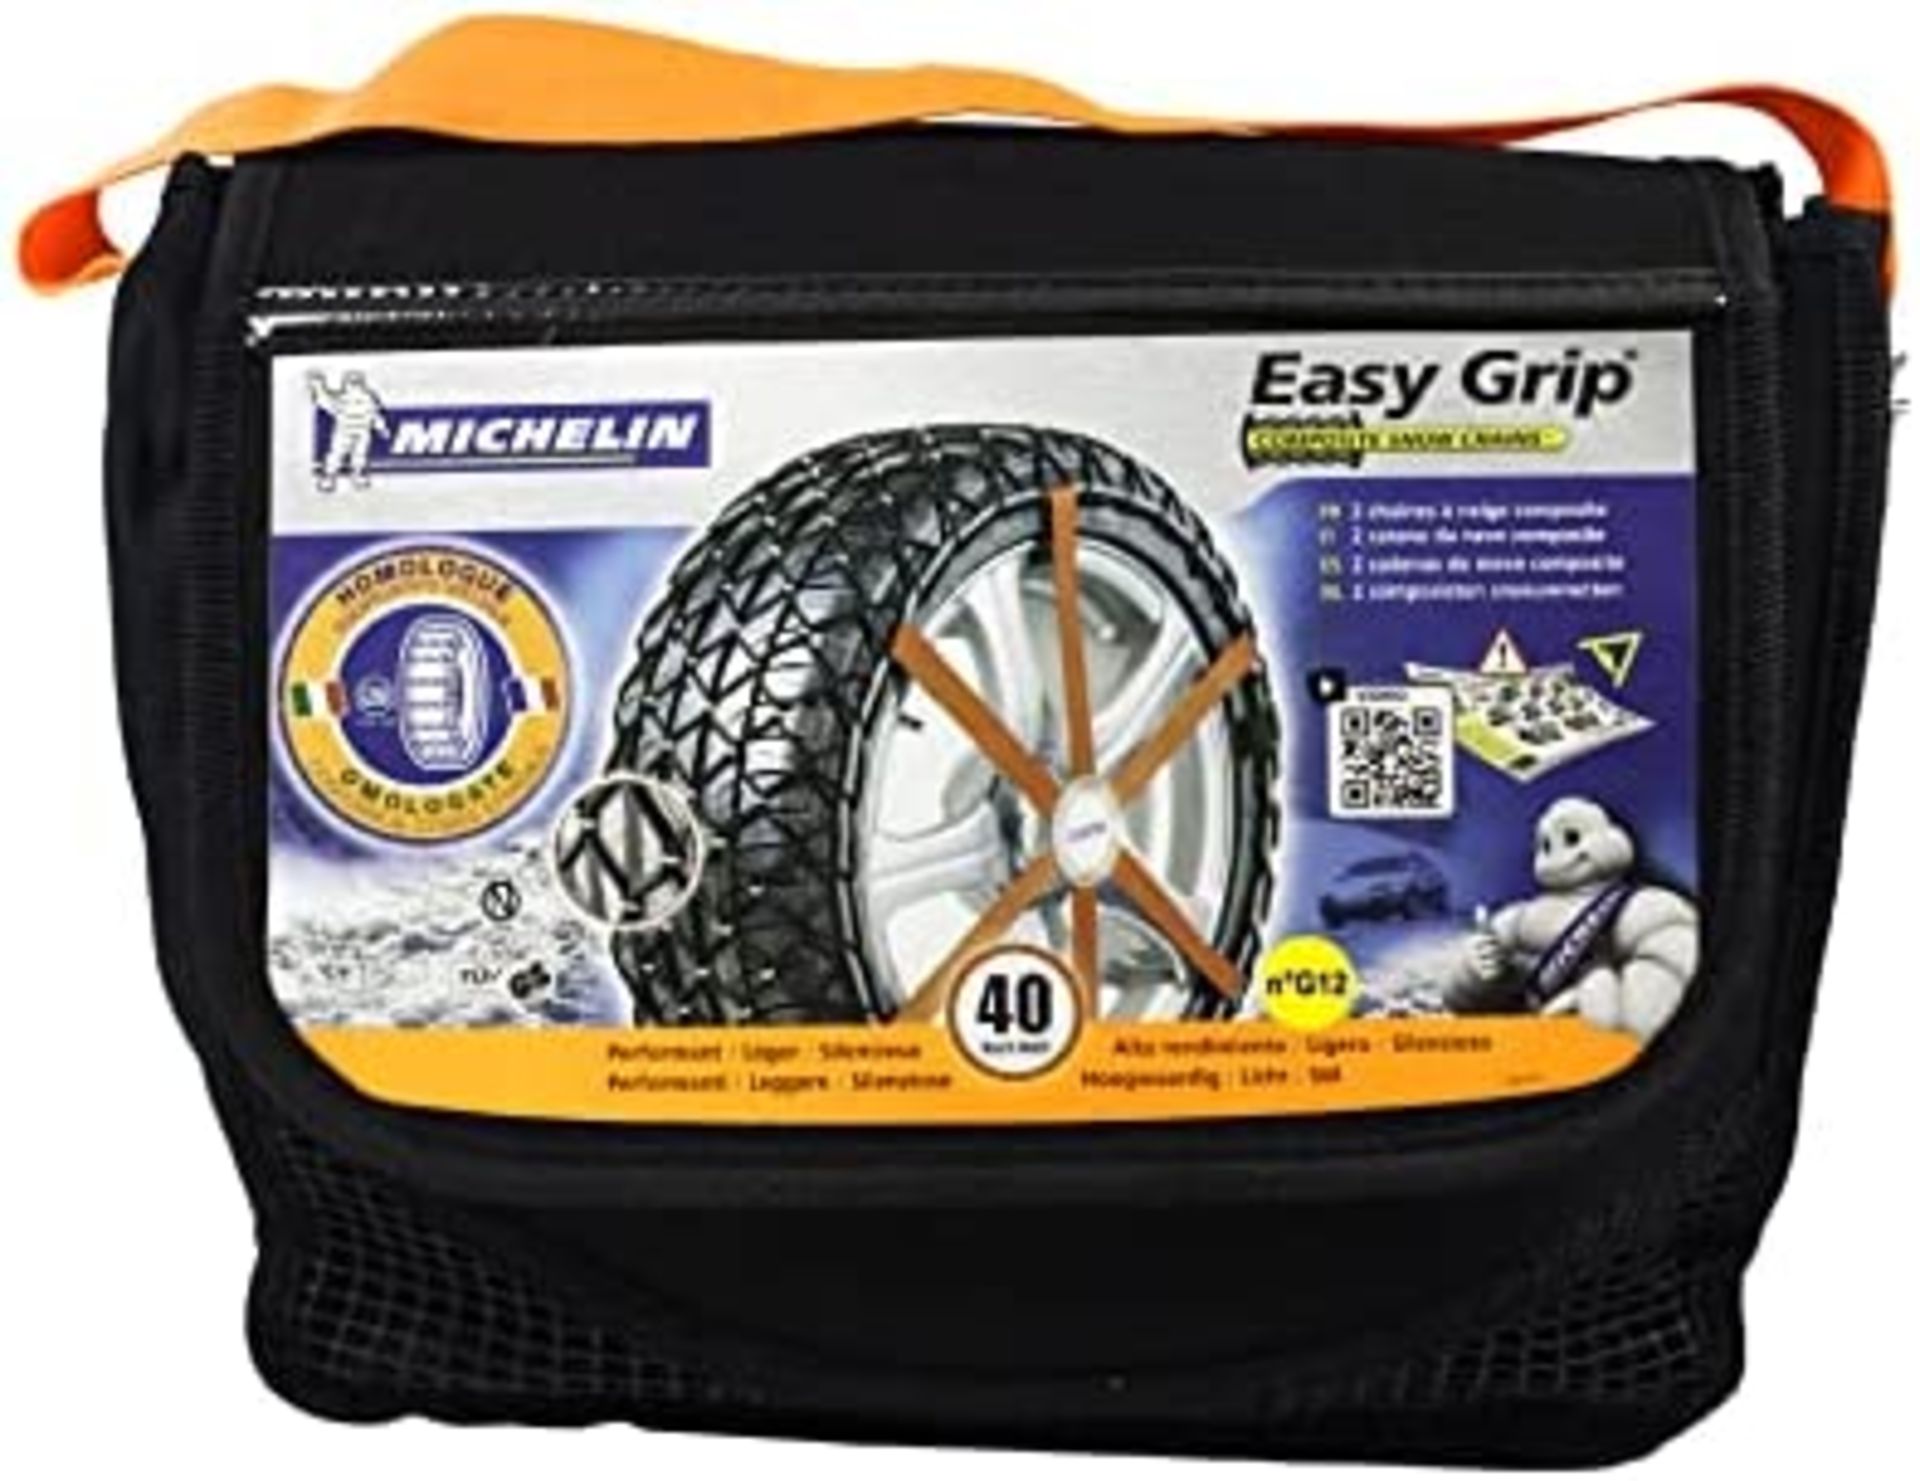 NEW PACKAGED SET OF Michelin Snow Sock Easy Grip G12. RRP £77.95. The Michelin Easy Grip is an